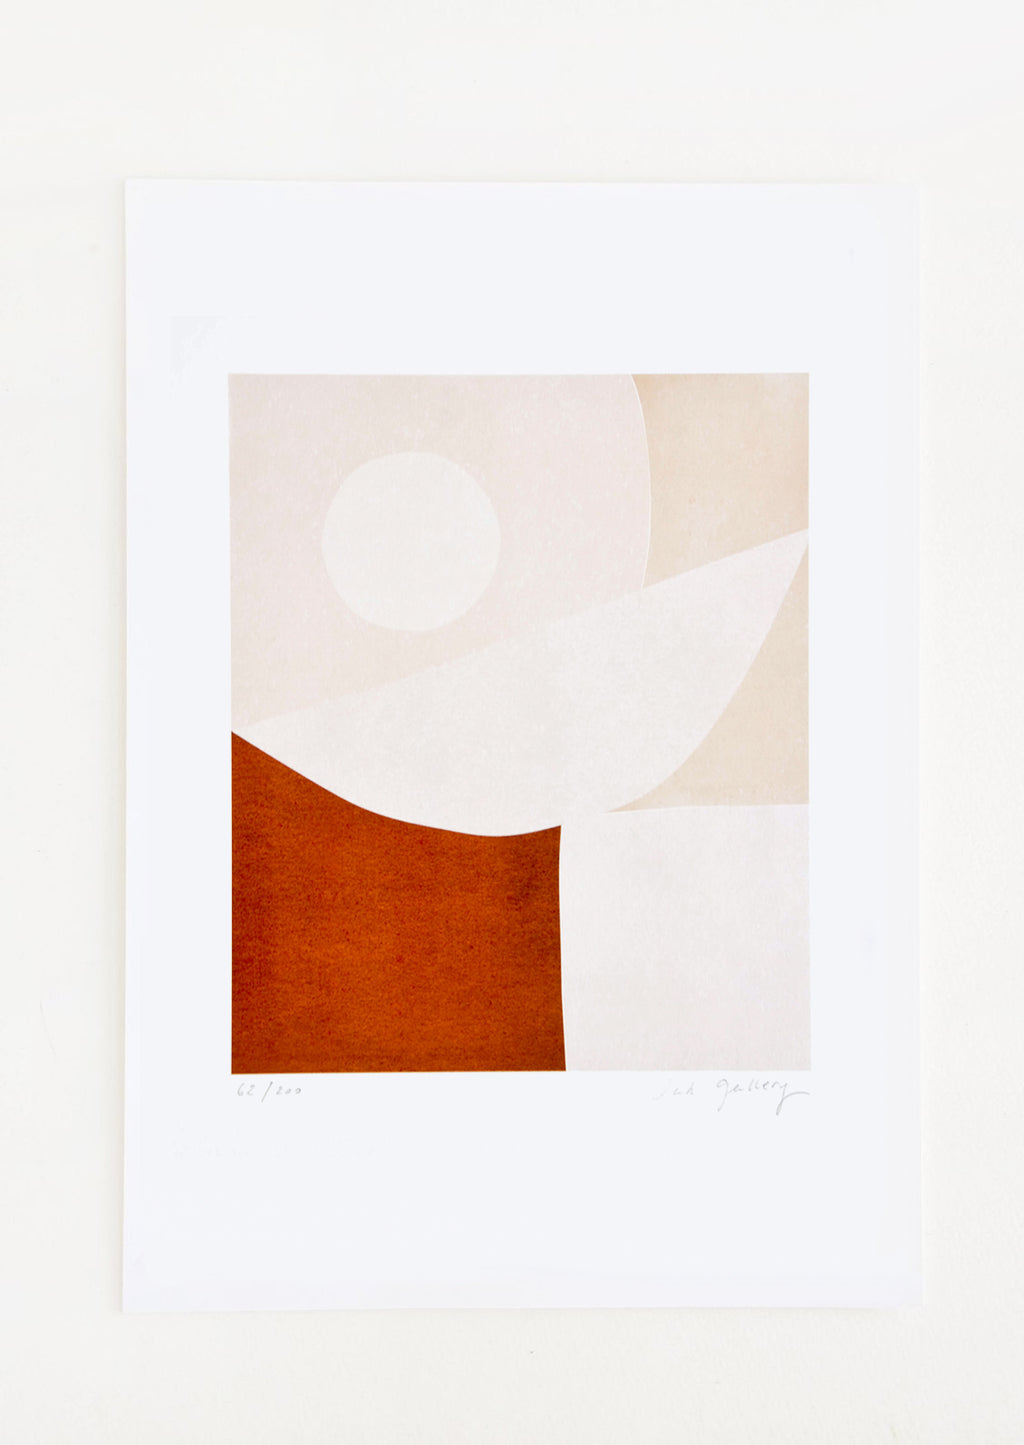 1: Abstract art print featuring geometric shapes in tan and brick red